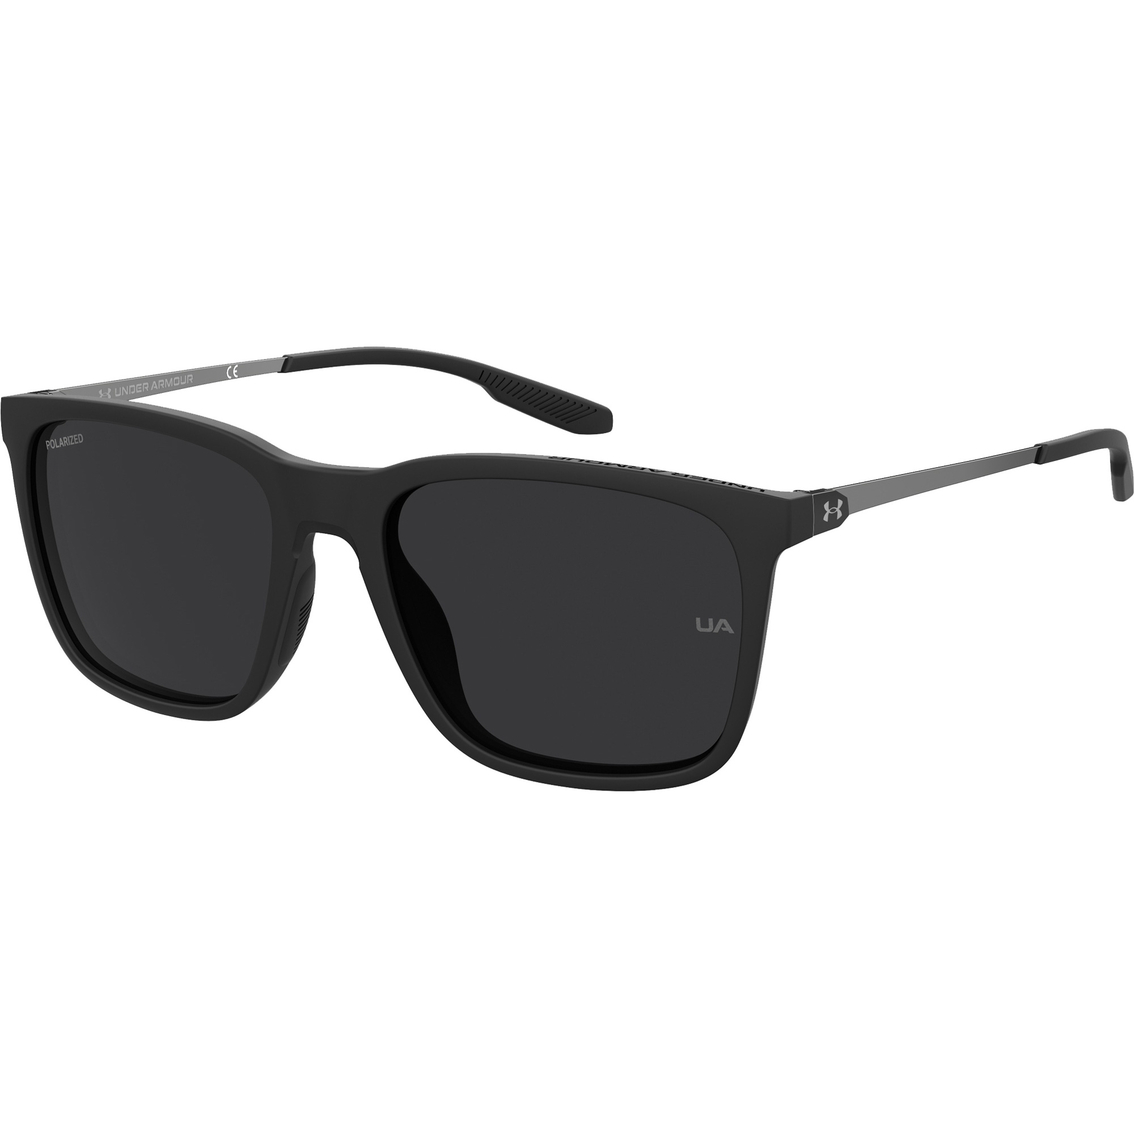 Under Armour Reliance Sunglasses 0003M9 - Image 1 of 5